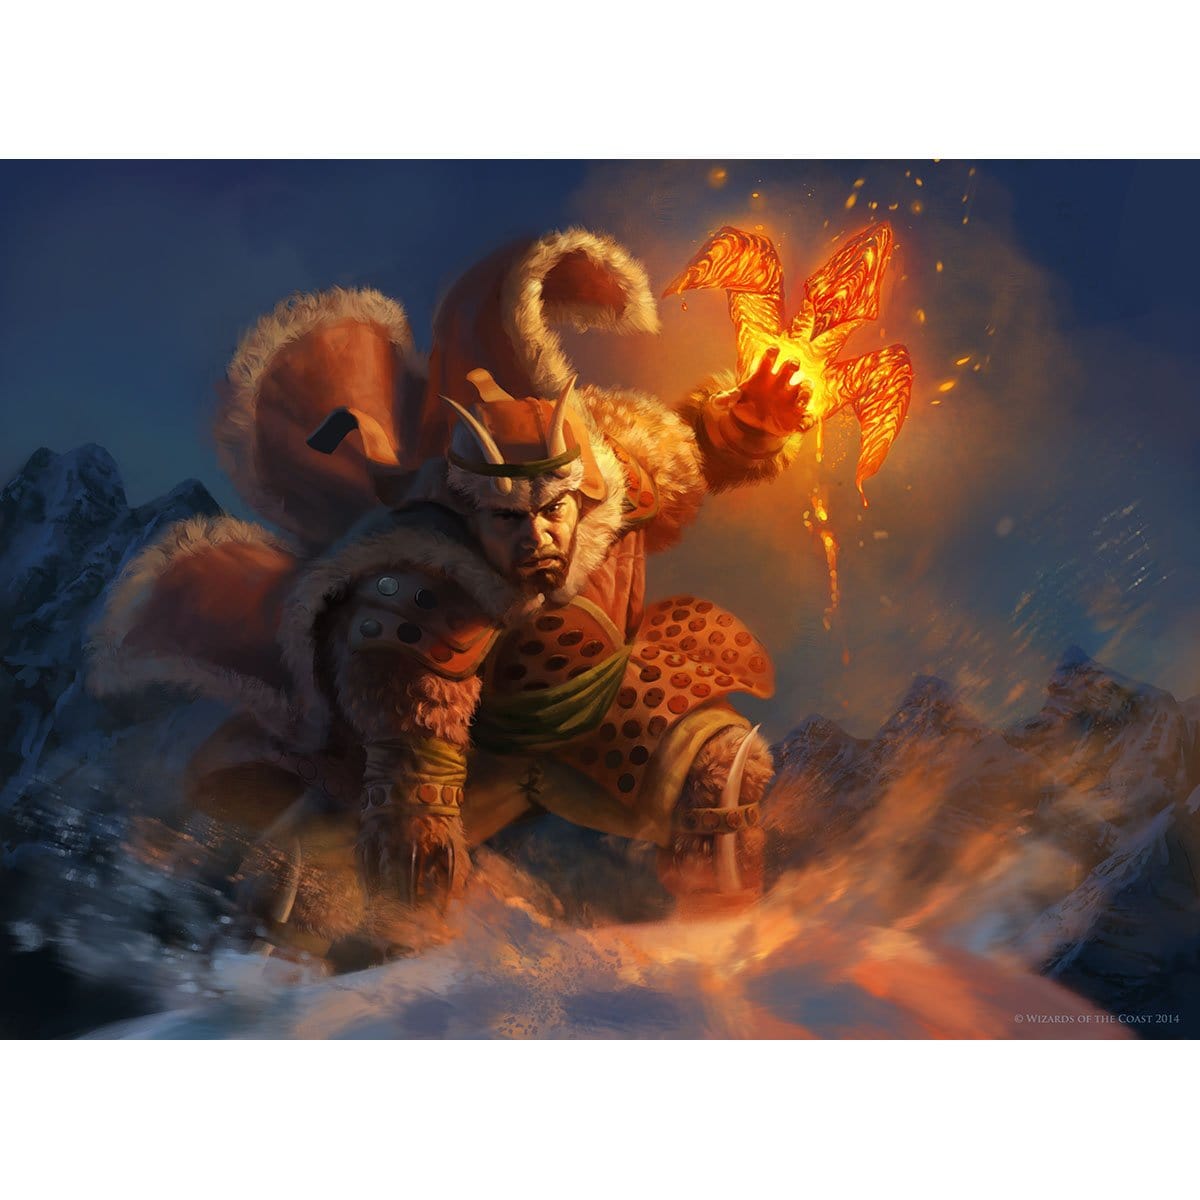 Dragon Grip Print - Print - Original Magic Art - Accessories for Magic the Gathering and other card games